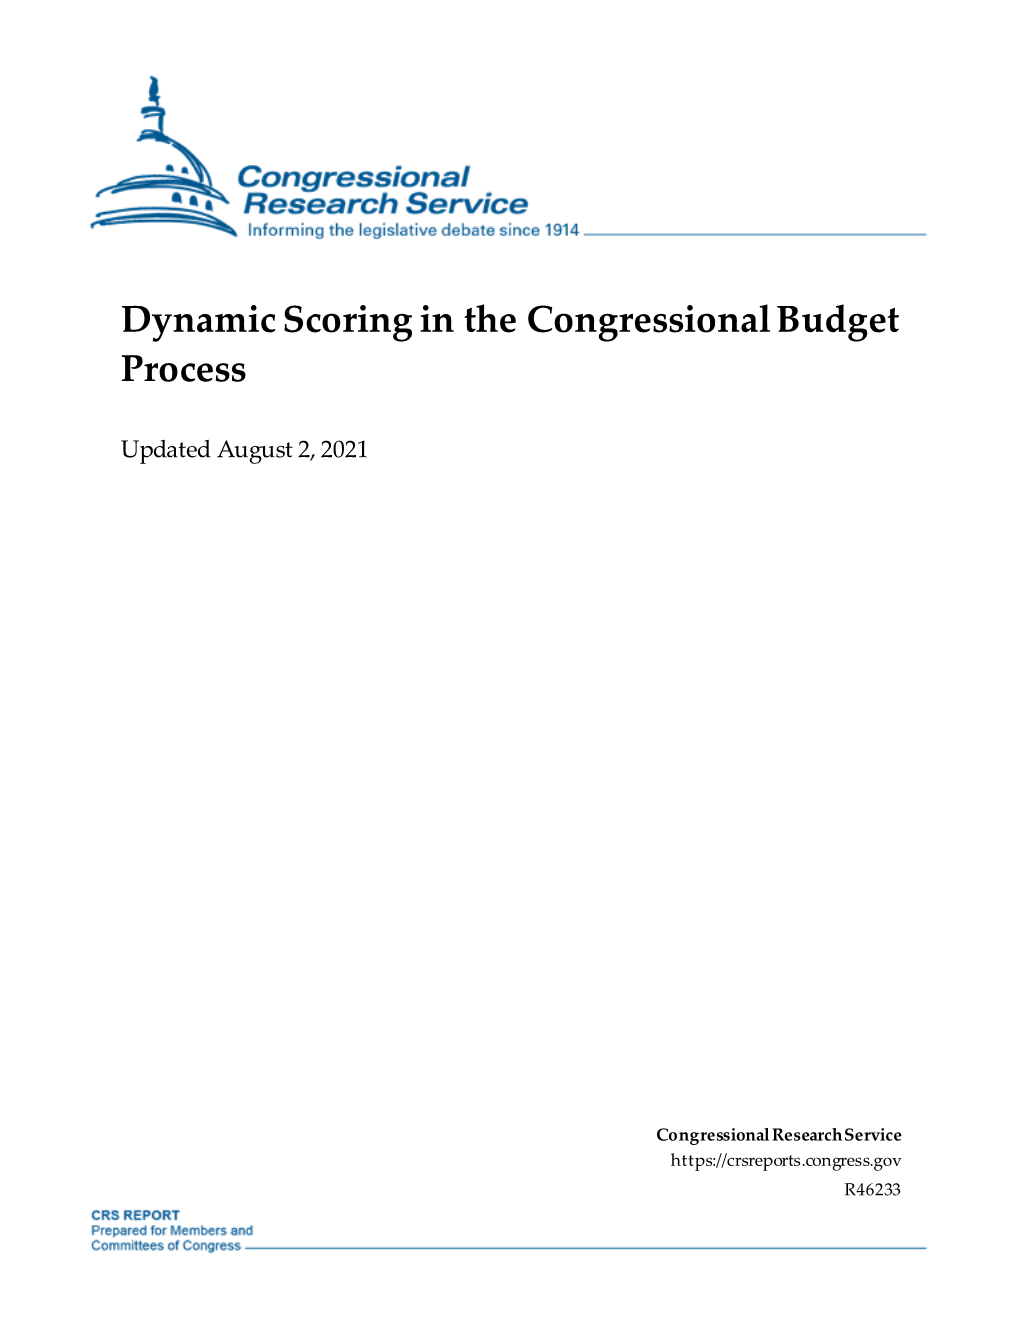 Dynamic Scoring in the Congressional Budget Process